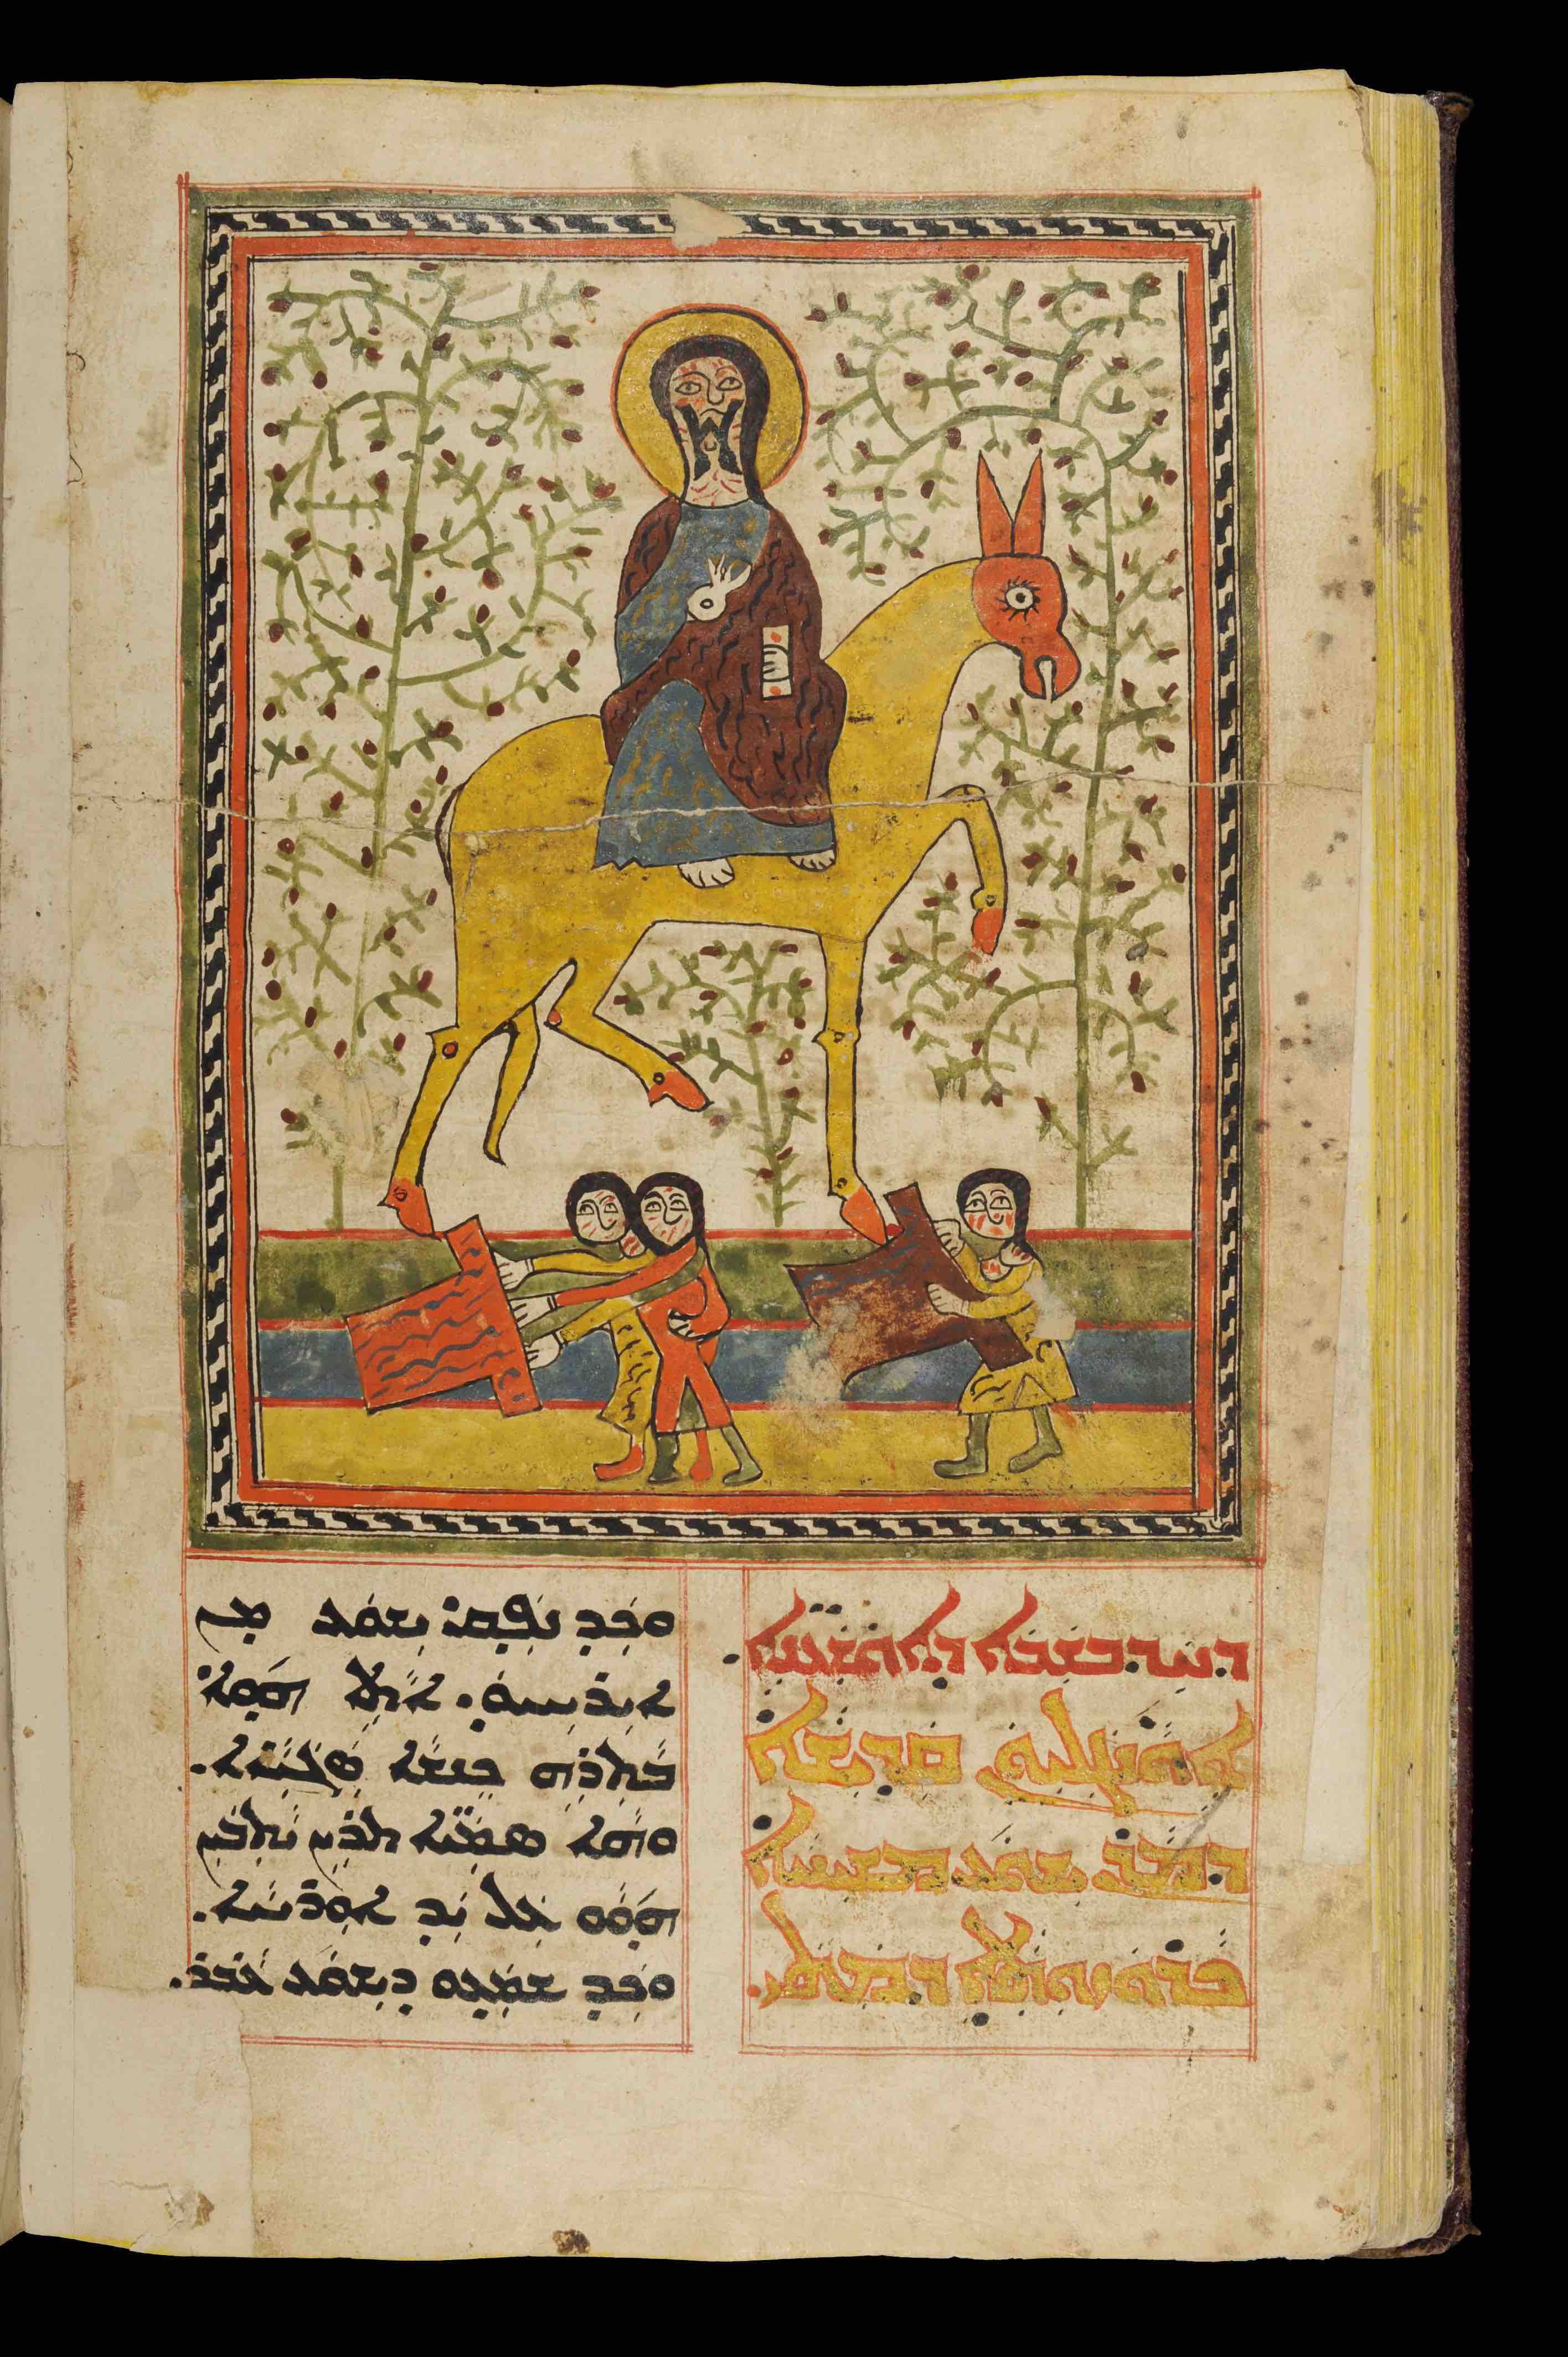 18th-c. liturgical manuscript in Syriac in the collection of the Dominican Friars of Mosul (<a href='https://w3id.org/vhmml/readingRoom/view/134188'>DFM 13</a>)